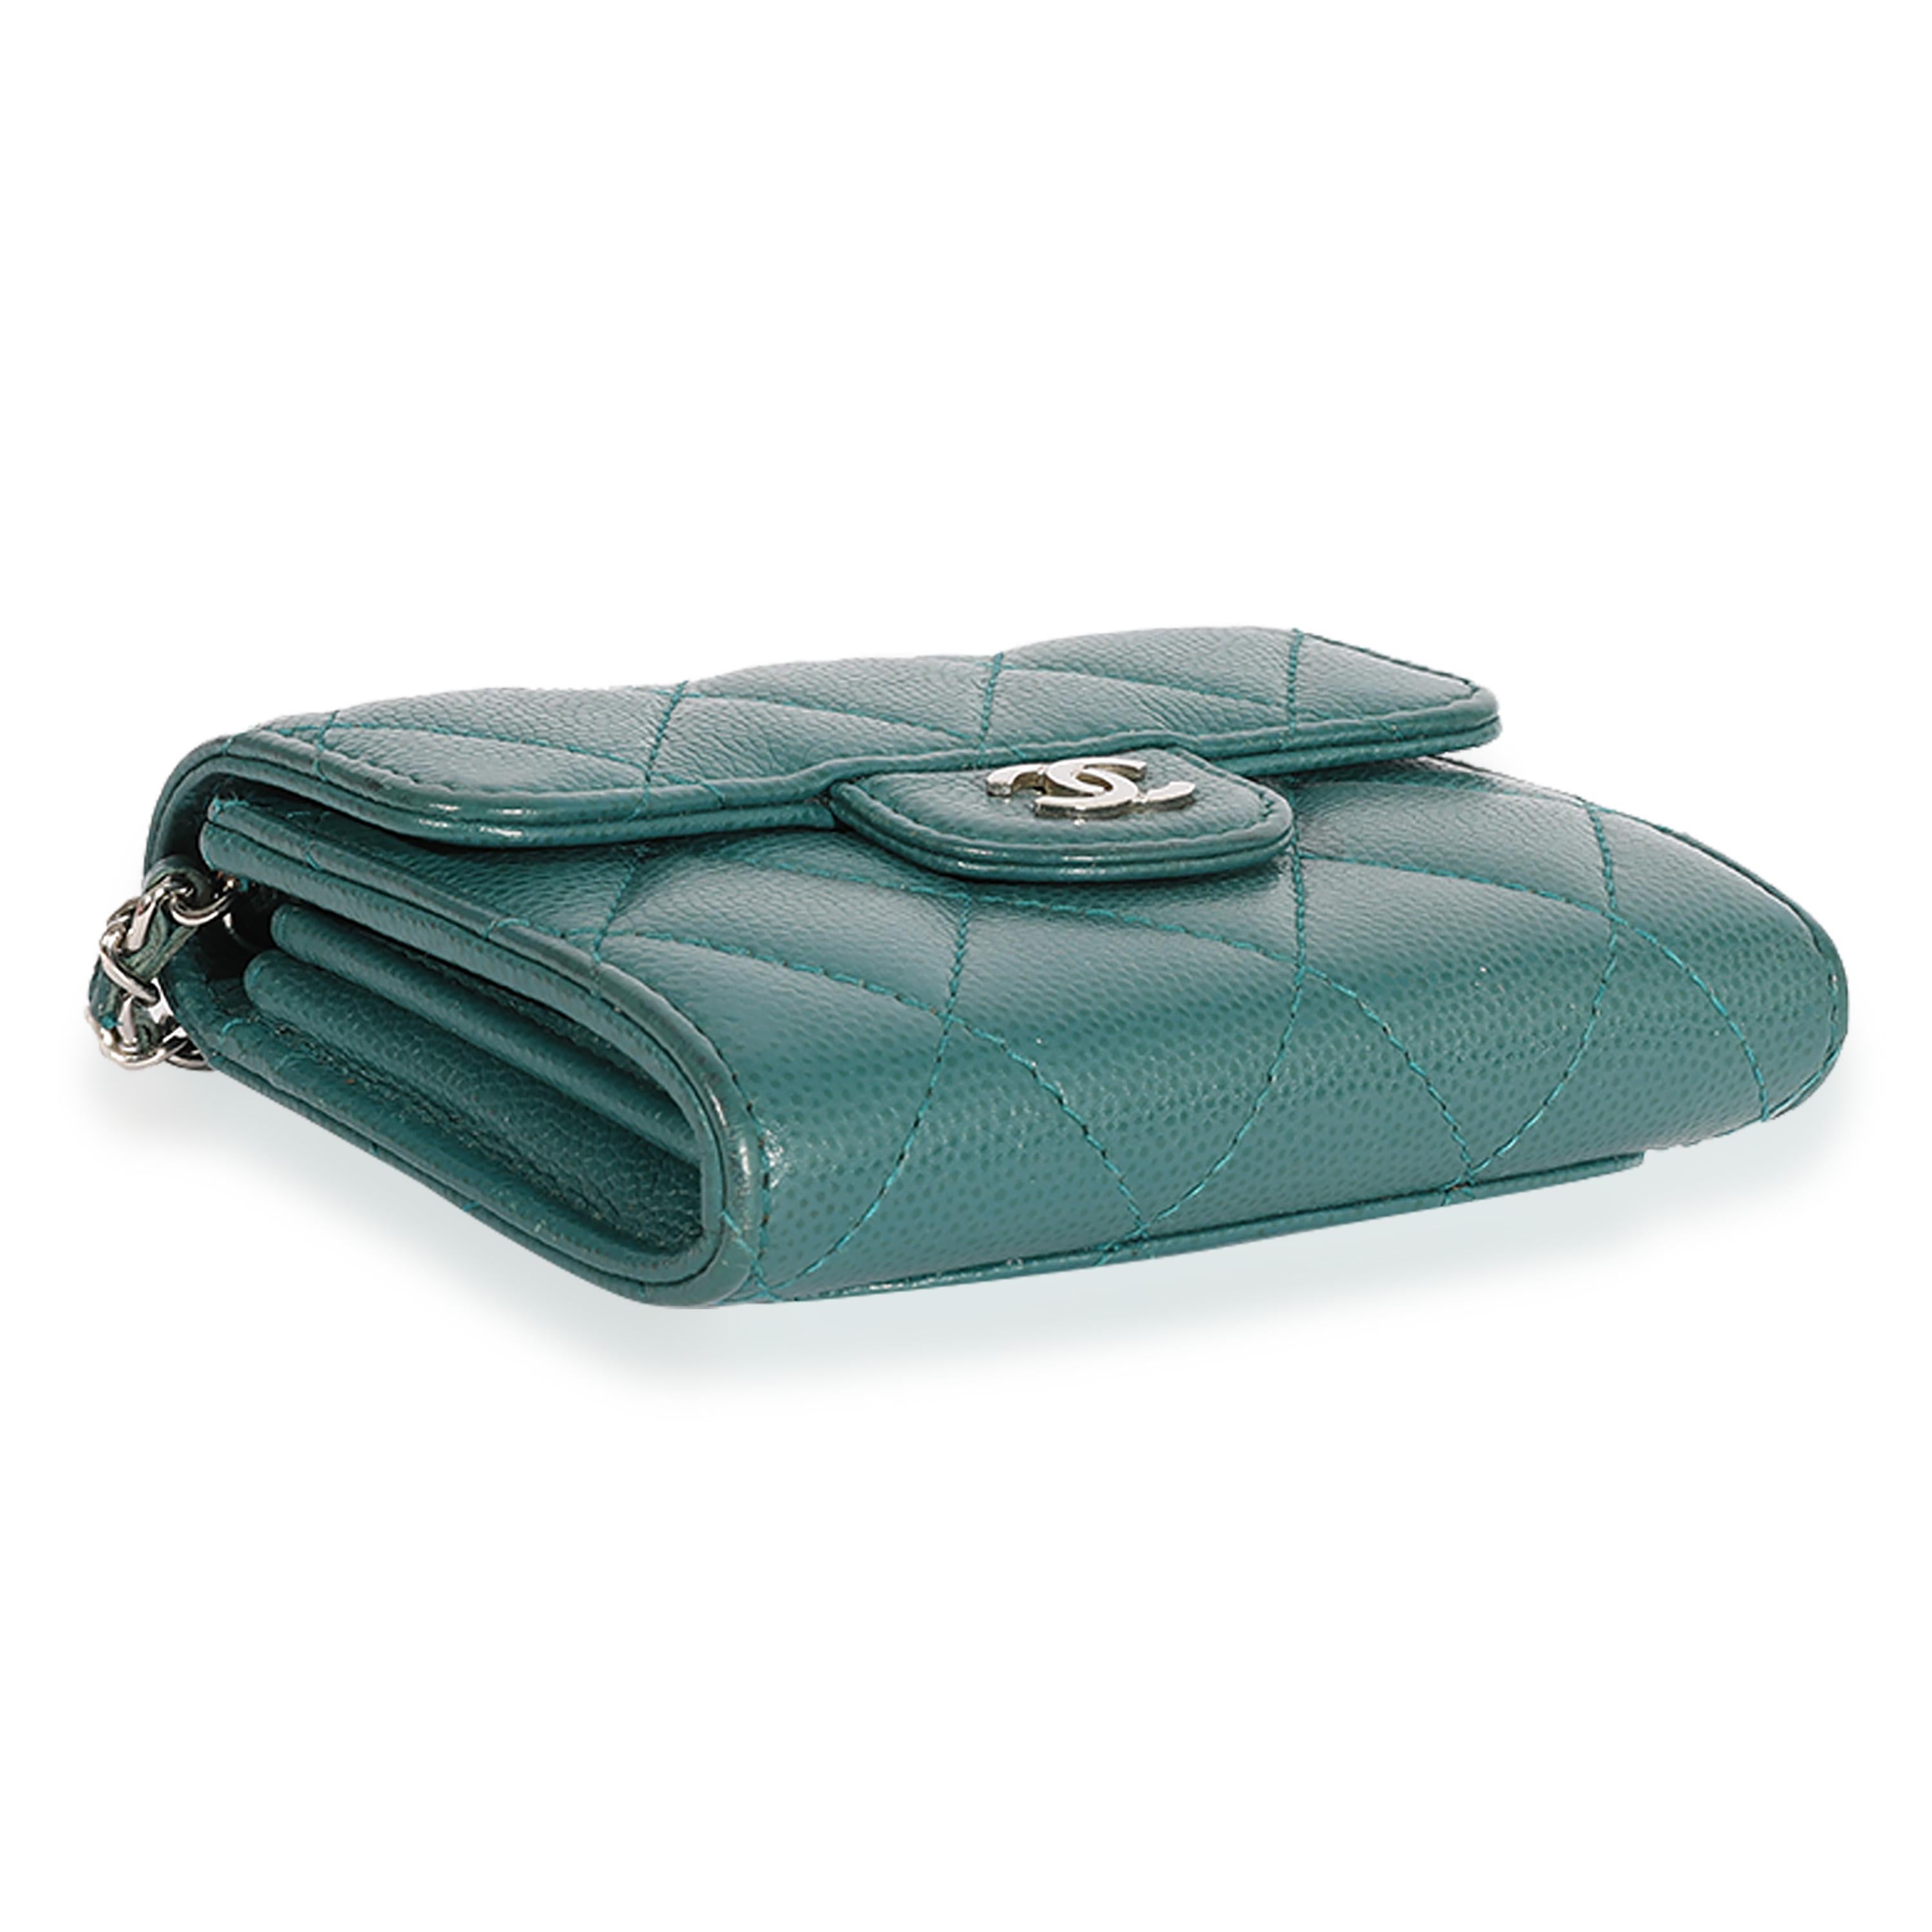 Listing Title: Chanel Teal Quilted Caviar Classic Card Holder on Chain
SKU: 119454
Condition: Pre-owned 
Handbag Condition: Very Good
Condition Comments: Very Good Condition. Scuffing to edges. Scratching to hardware. Marks and discoloration at